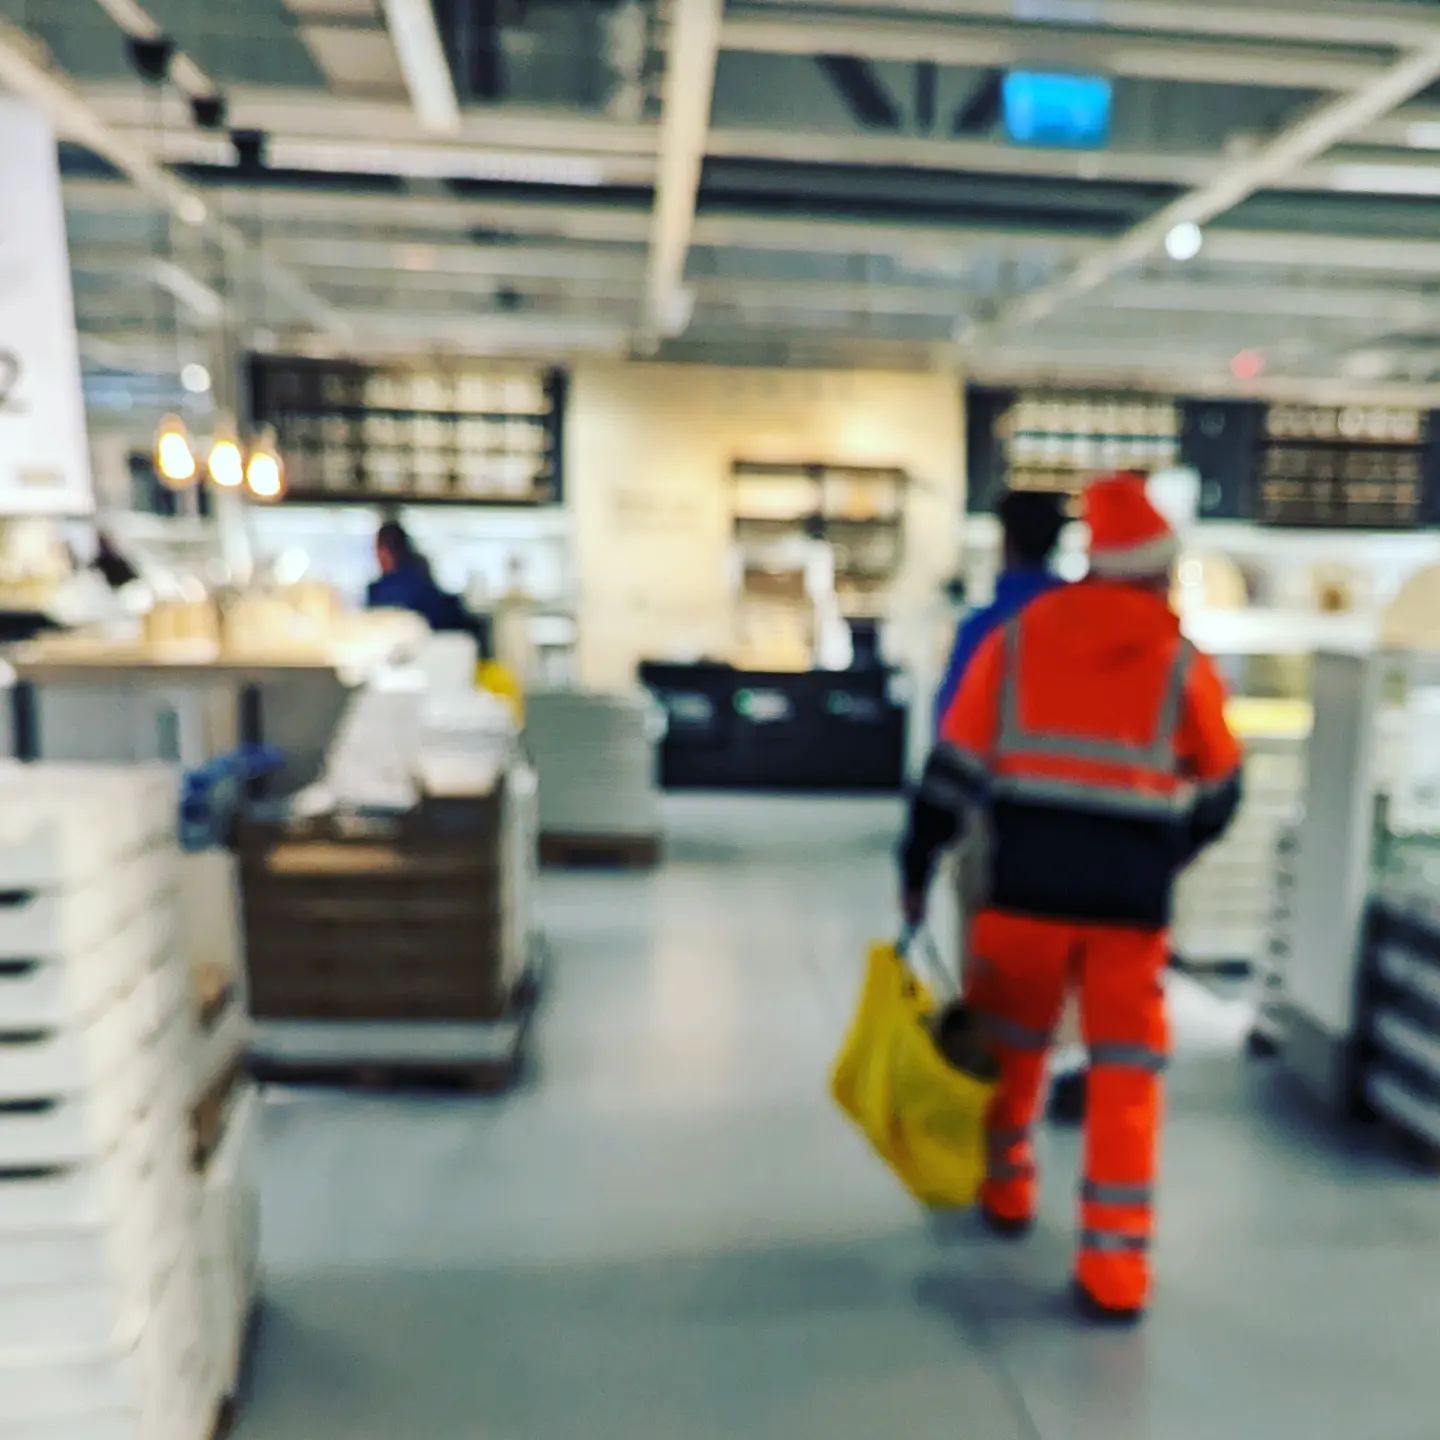 If anyone's looking for Hi-vis Santa, he was just in Eastgate IKEA a few moments ago.